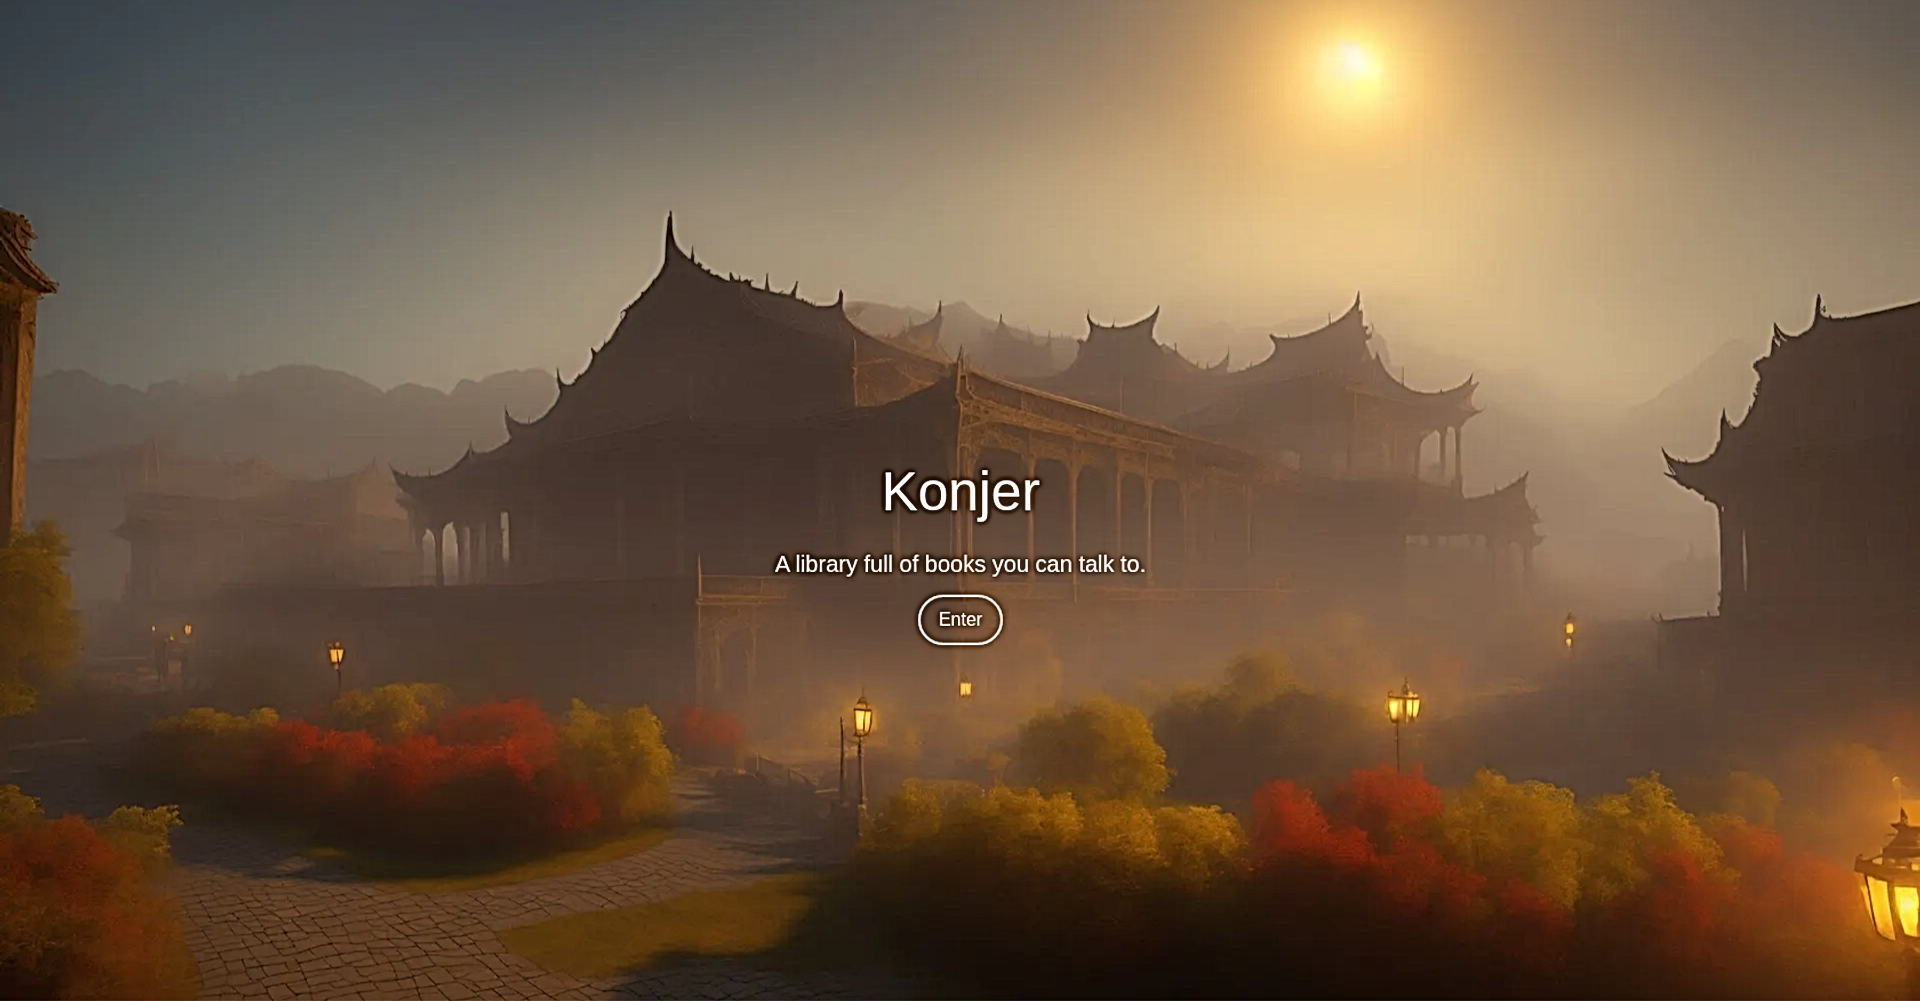 Konjer featured